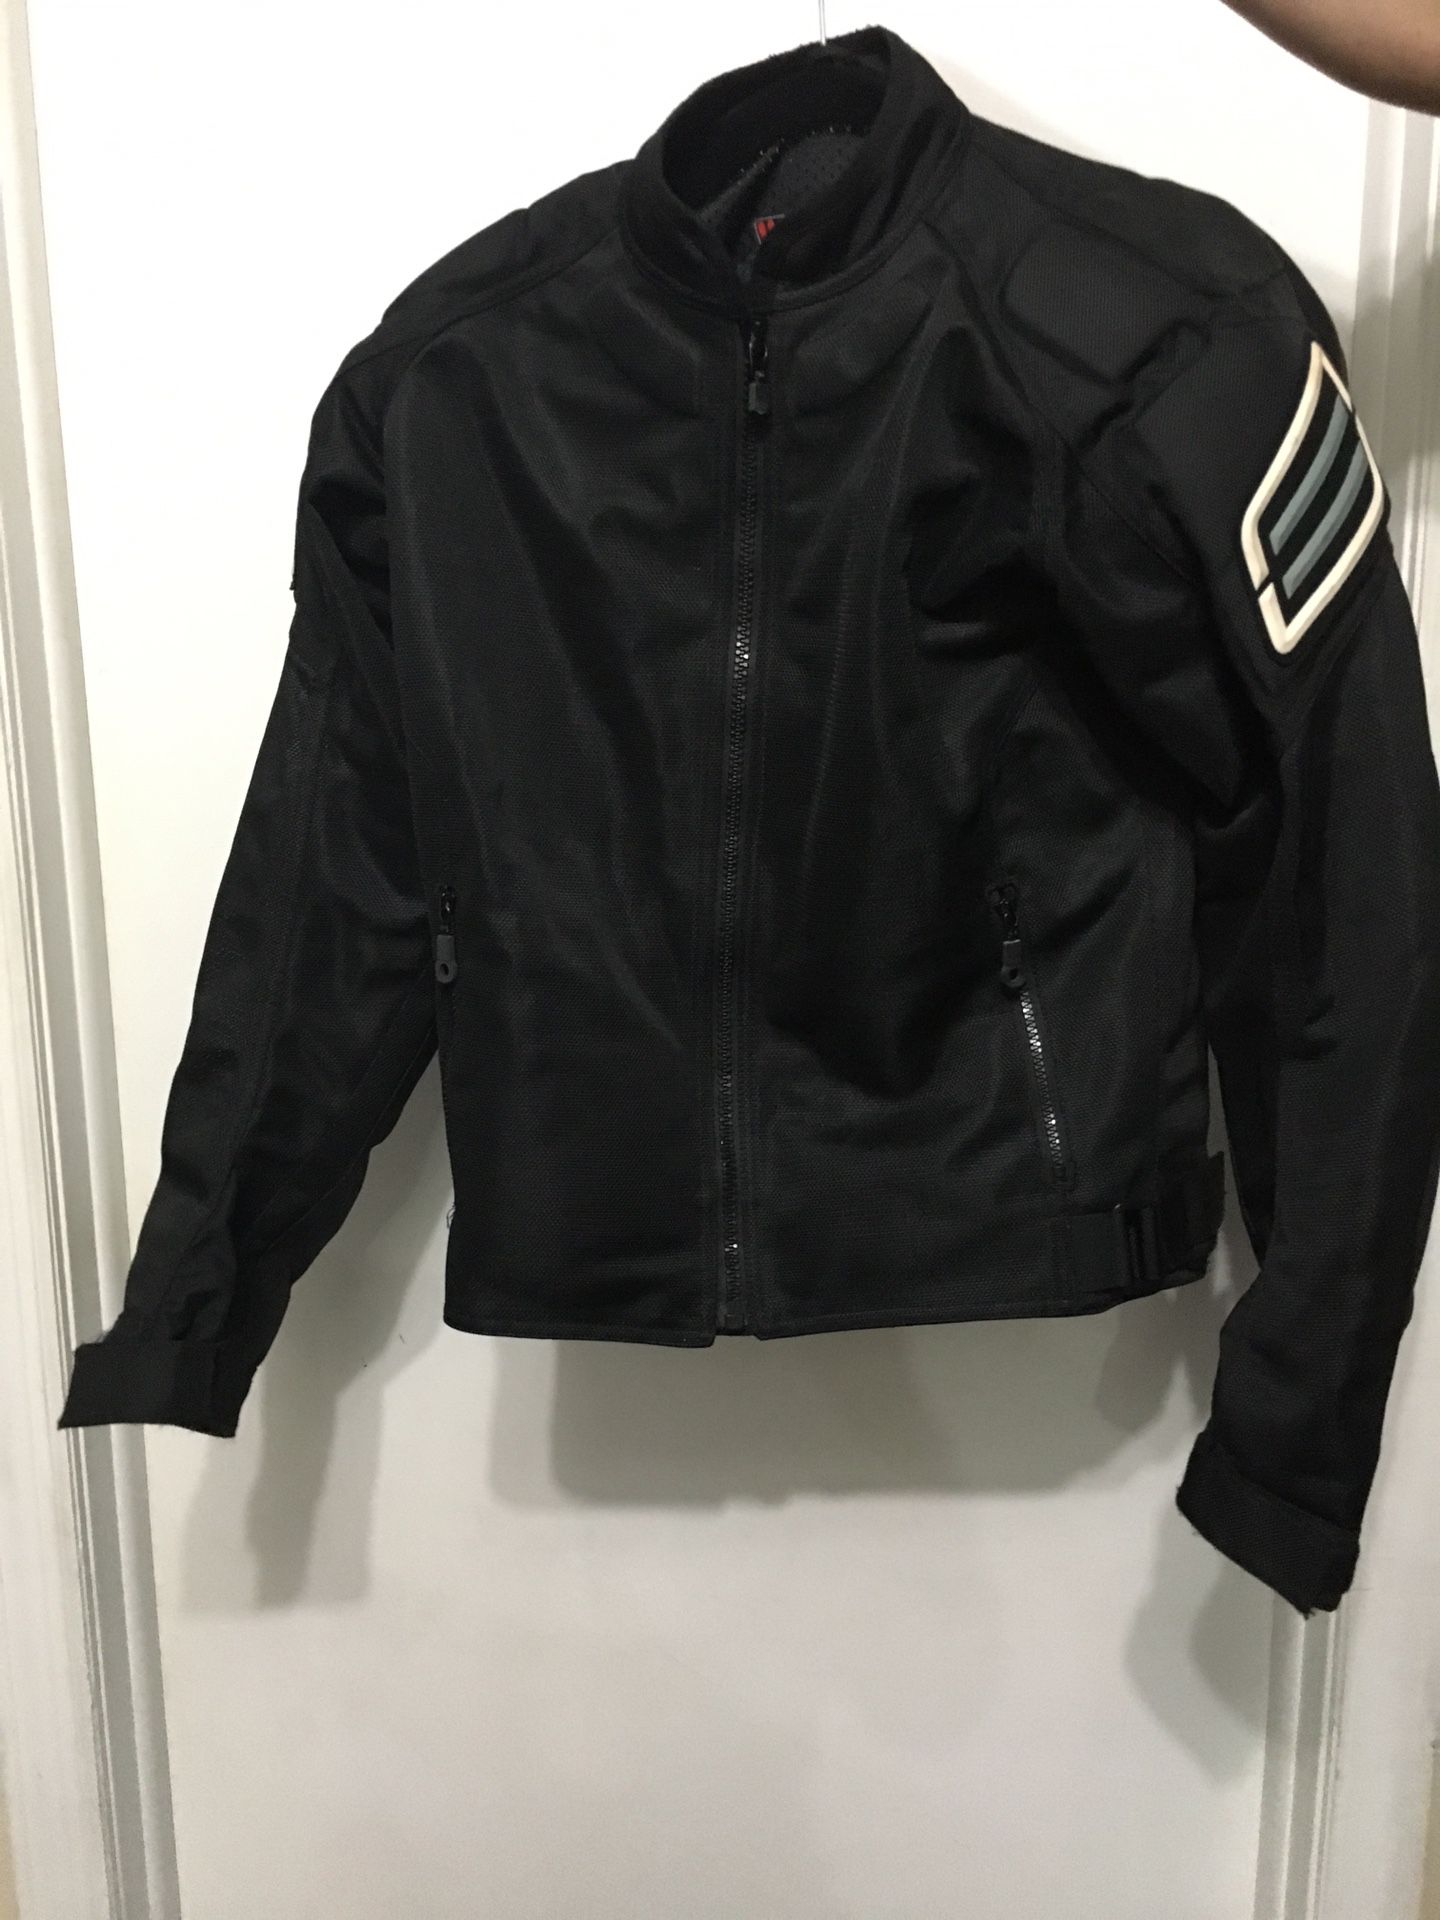 Woman’s Small Motorcycle Riding Jacket